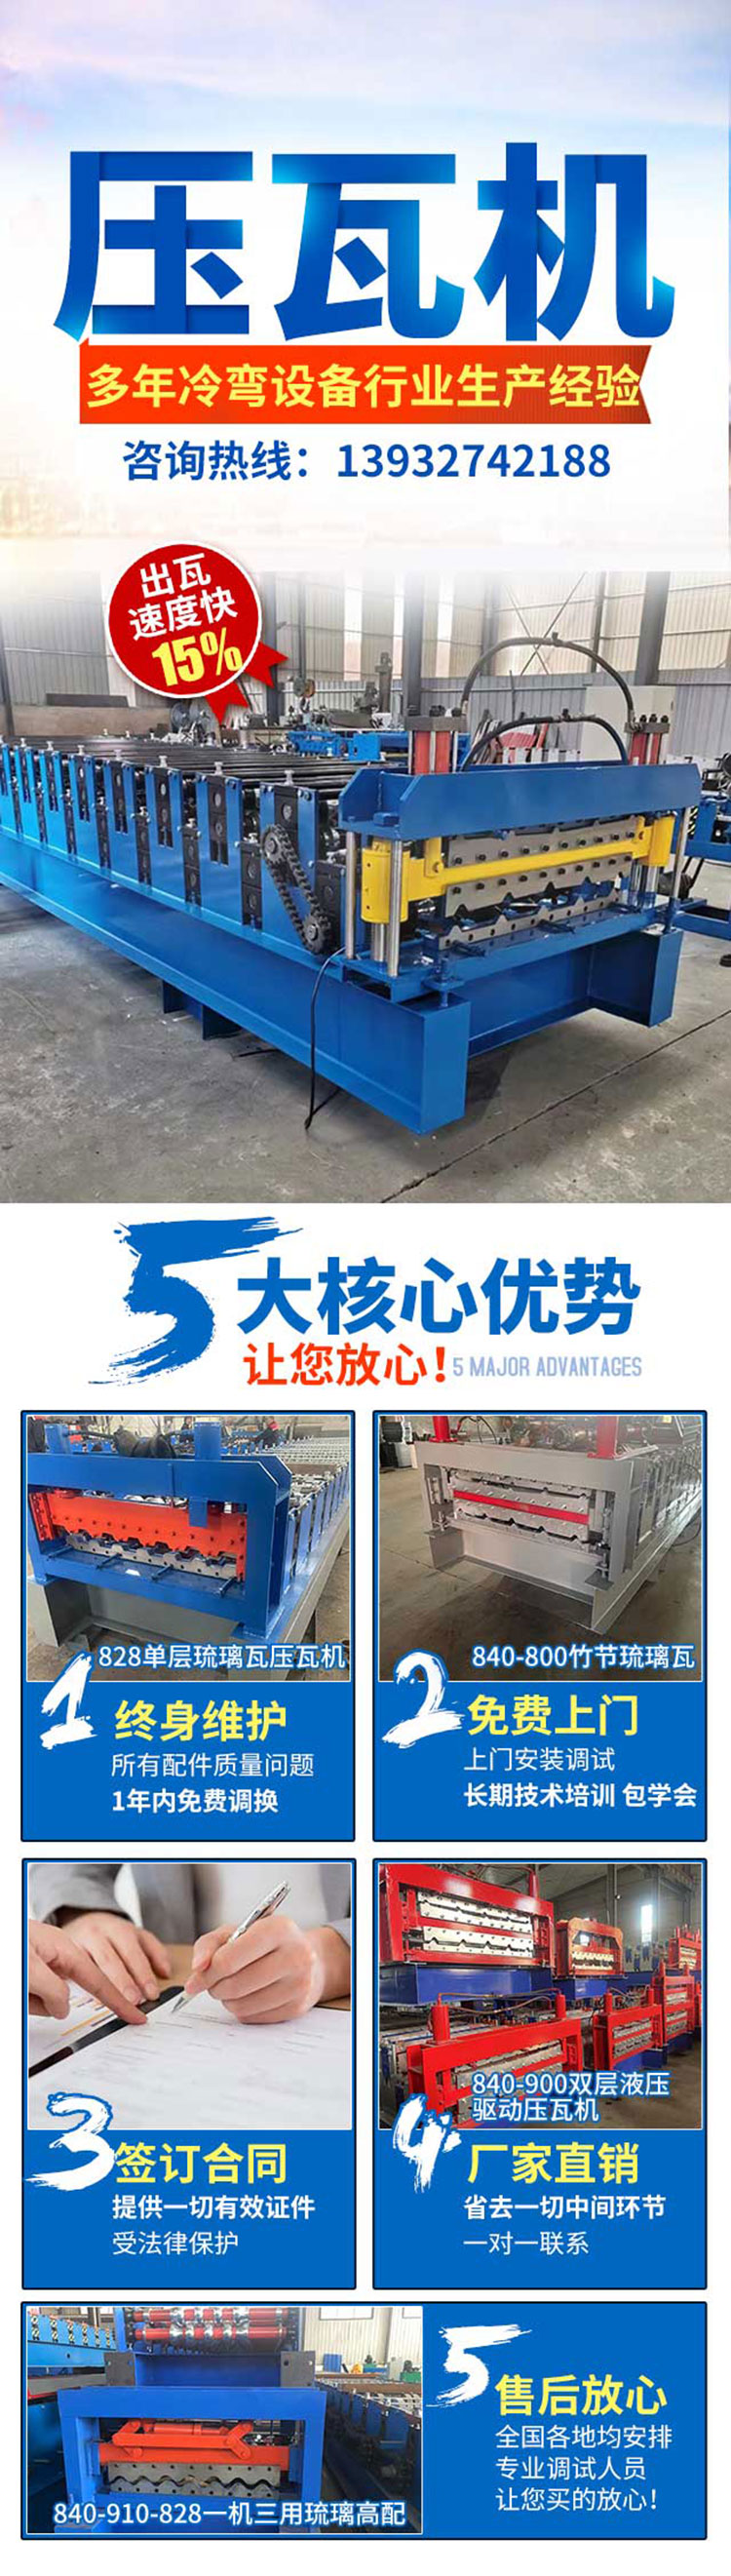 Disinfection cabinet hanging machine Kitchen cabinet frame pressing machine Frame equipment Purlin equipment Abnormal production